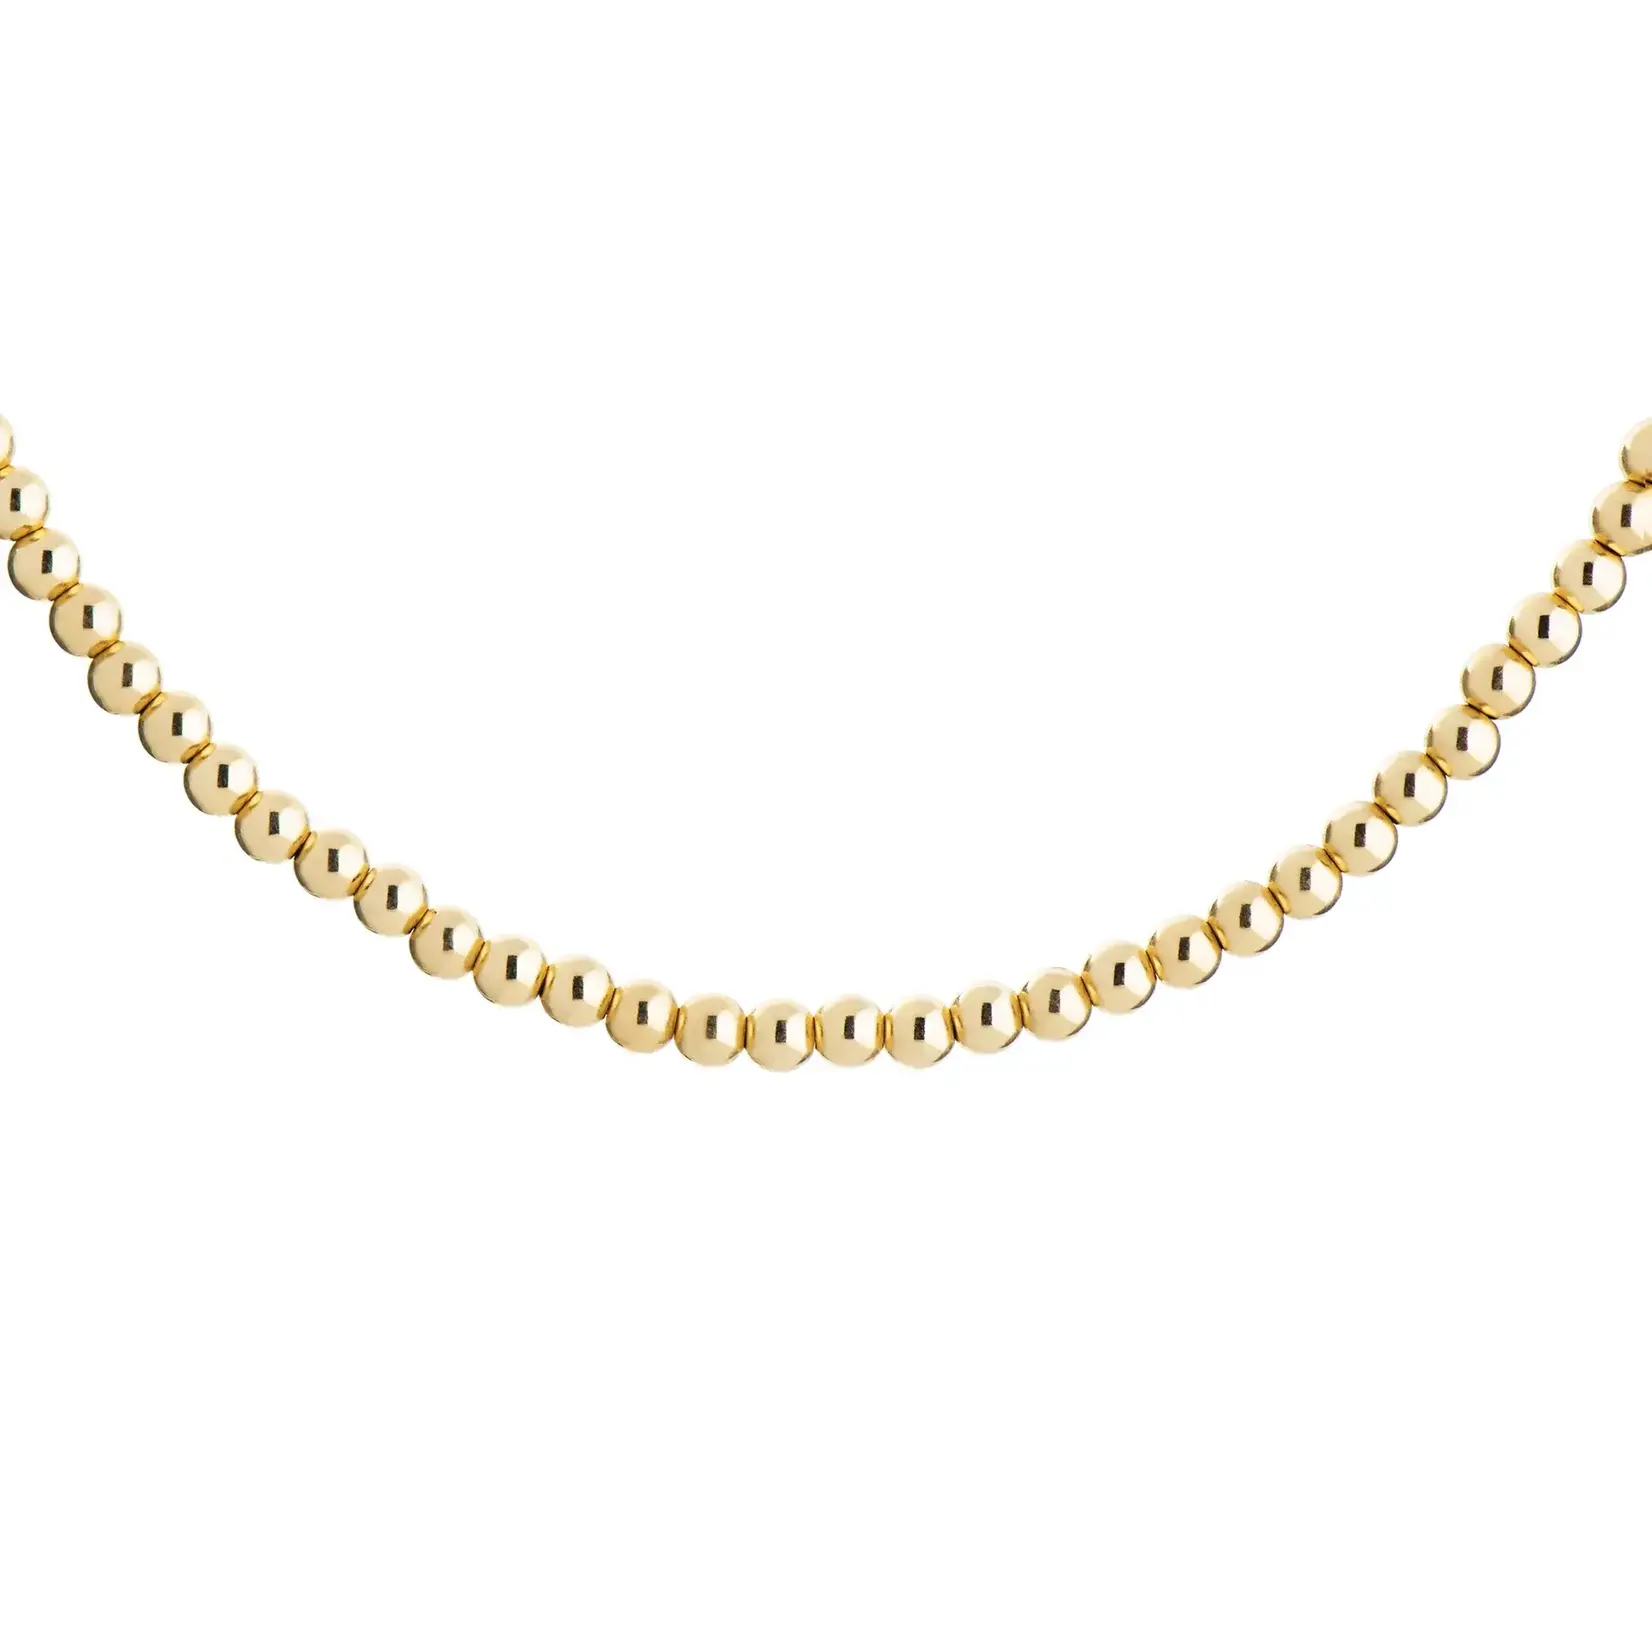 Lolo Jewellery Gold Ball Neclace - 4mm - 18"